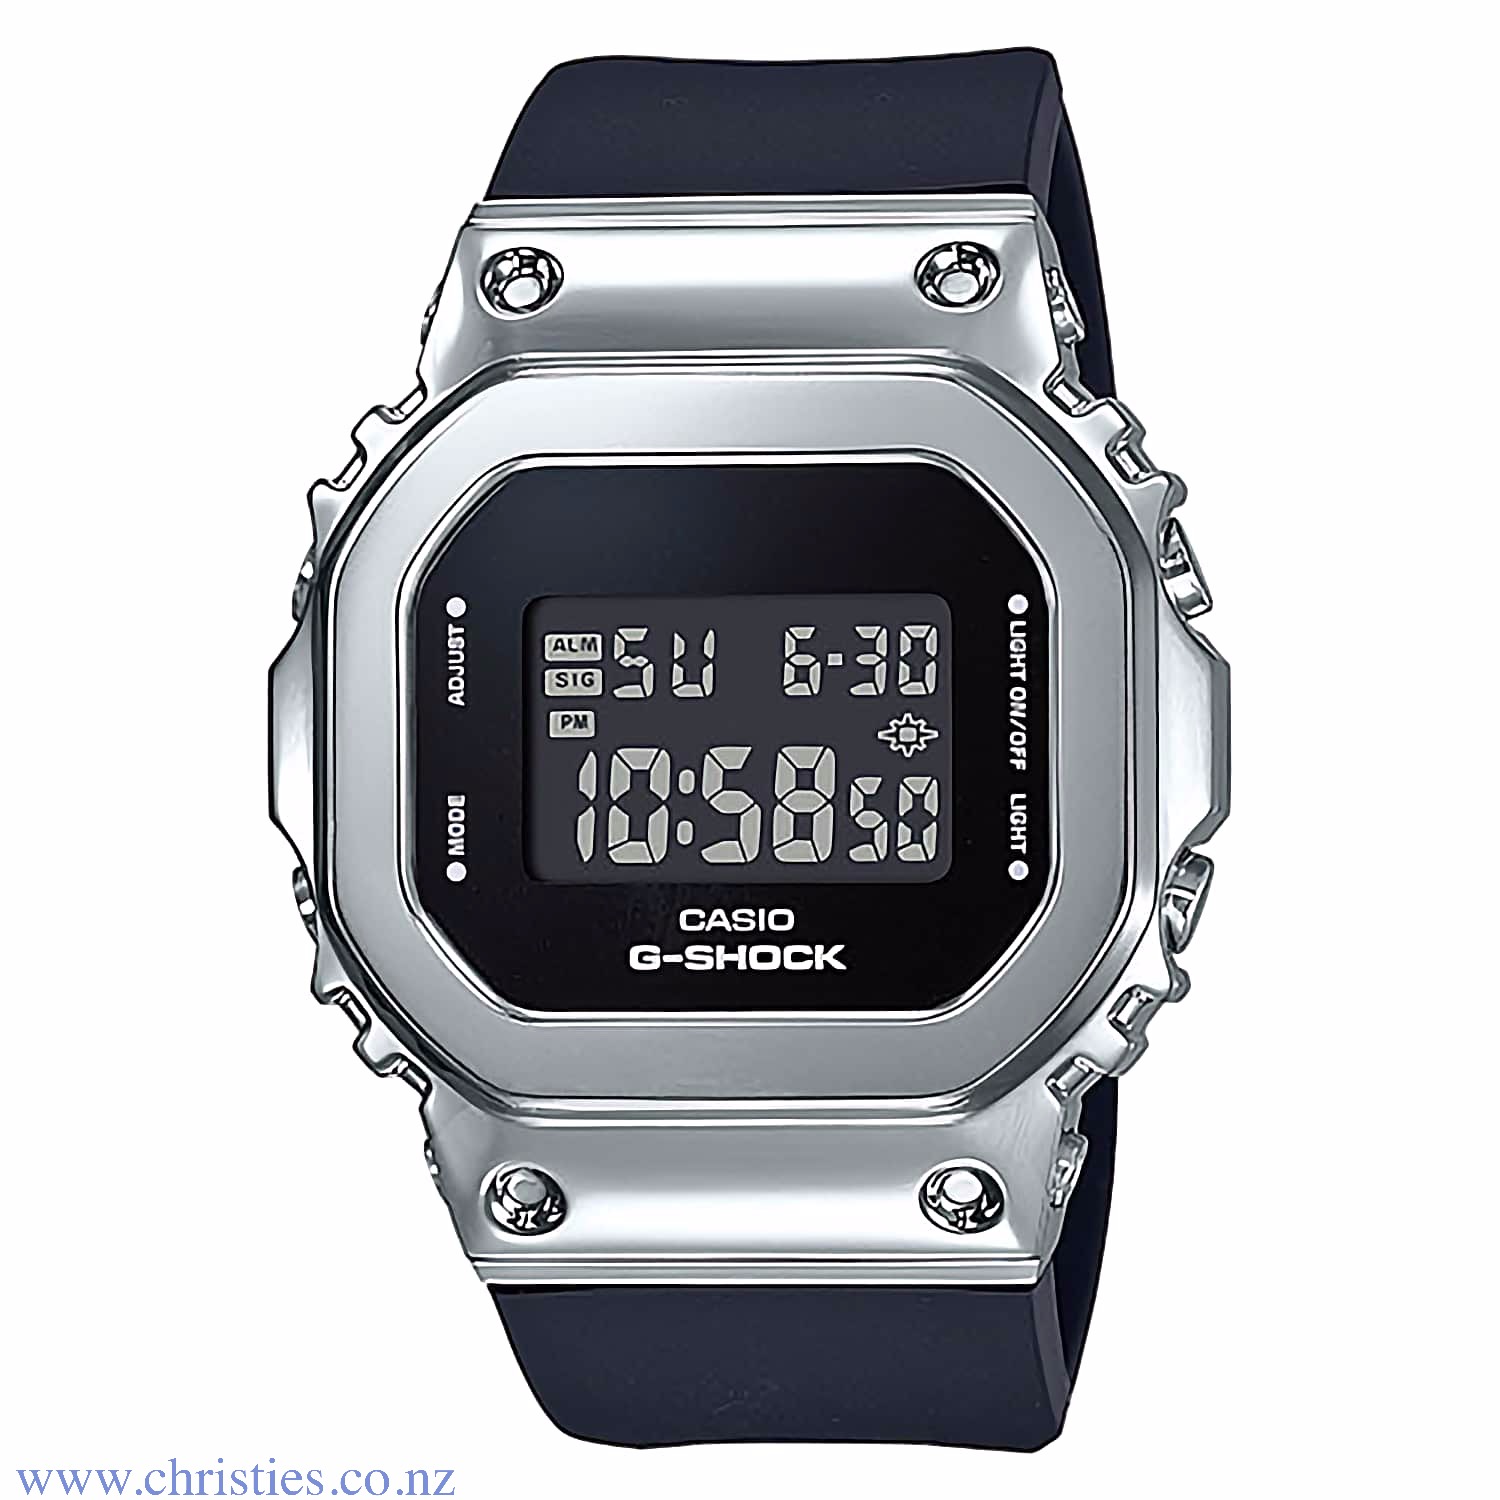 GMS5600-1 G-Shock Womens Metal  Bezel Watch. Introducing new compact G-SHOCK models that are great choices for women who prefer mannish G-SHOCK styling. The iconic square design of the 5600 Series with a metal-covered bezel. All the shock resistance of th